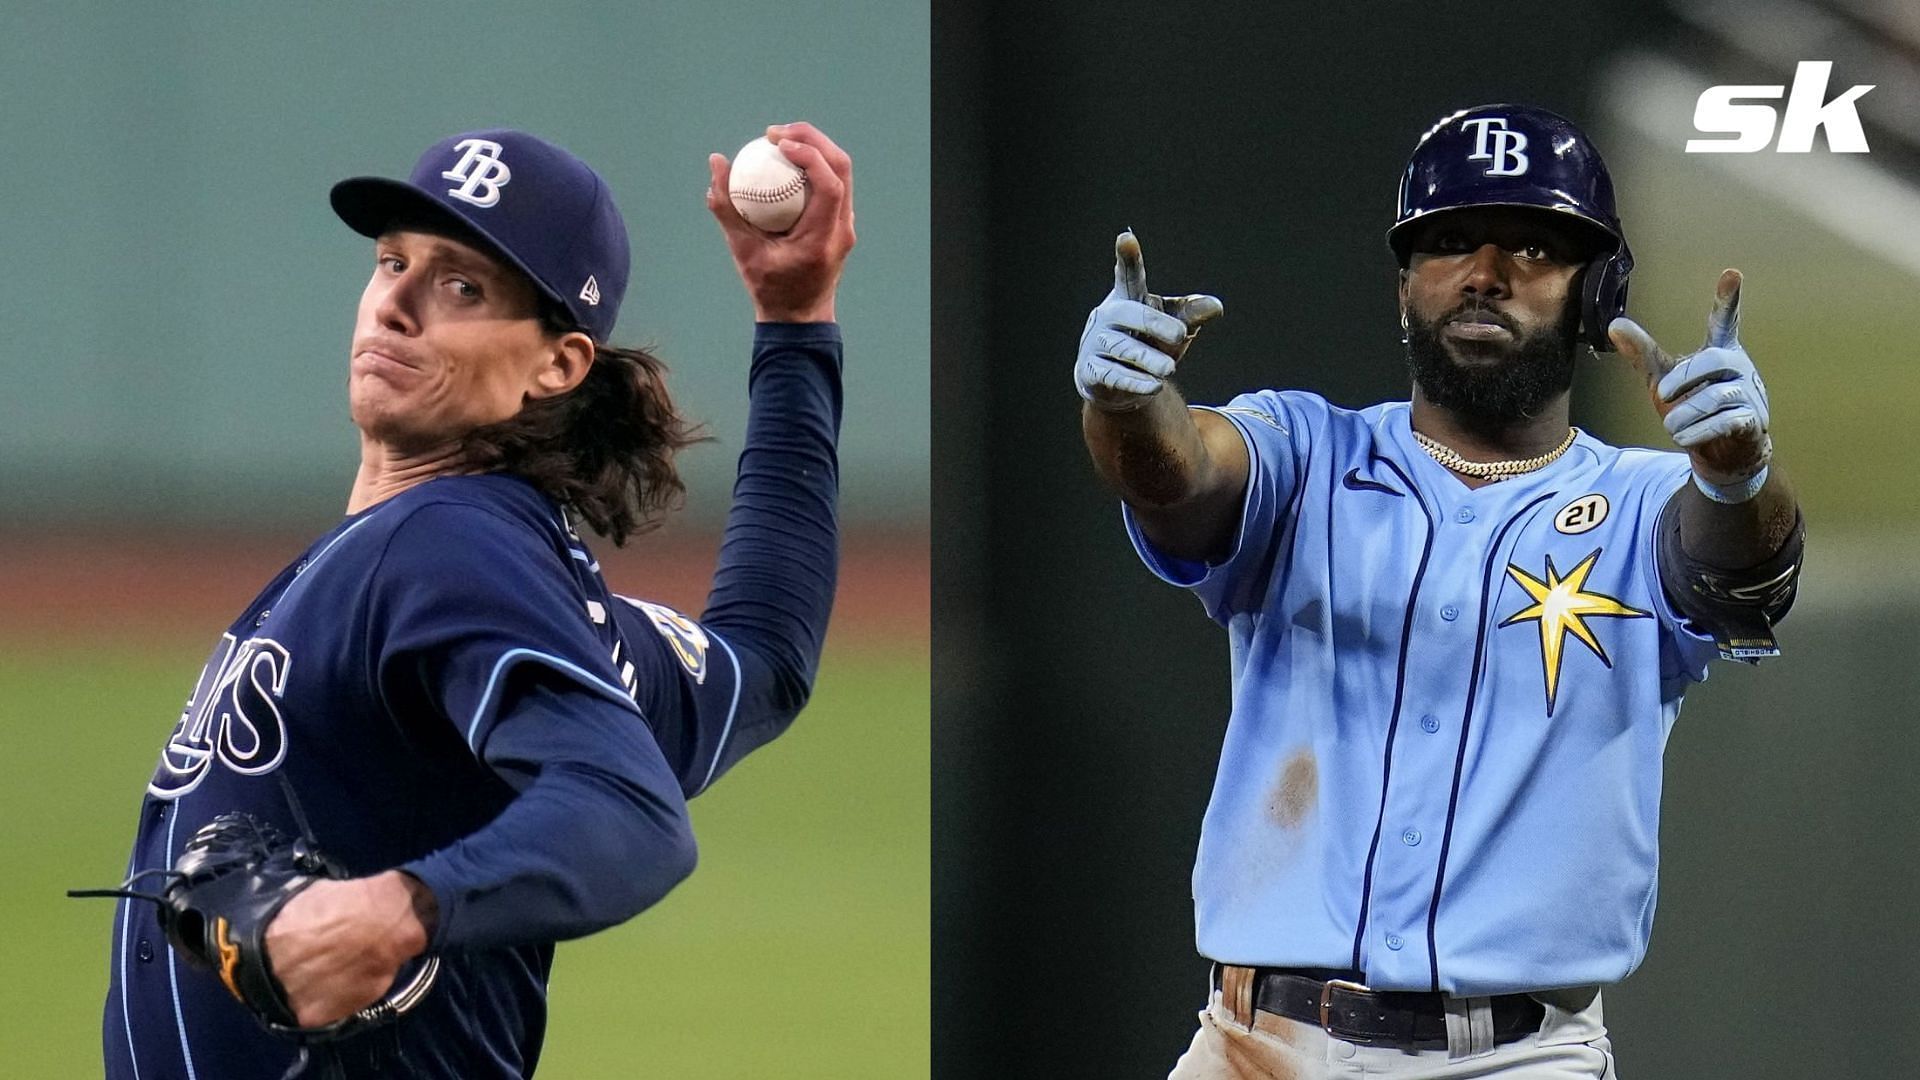 The Los Angeles Dodgers are still looking to land both Randy Arozarena and Tyler Glasnow from the Tampa Bay Rays